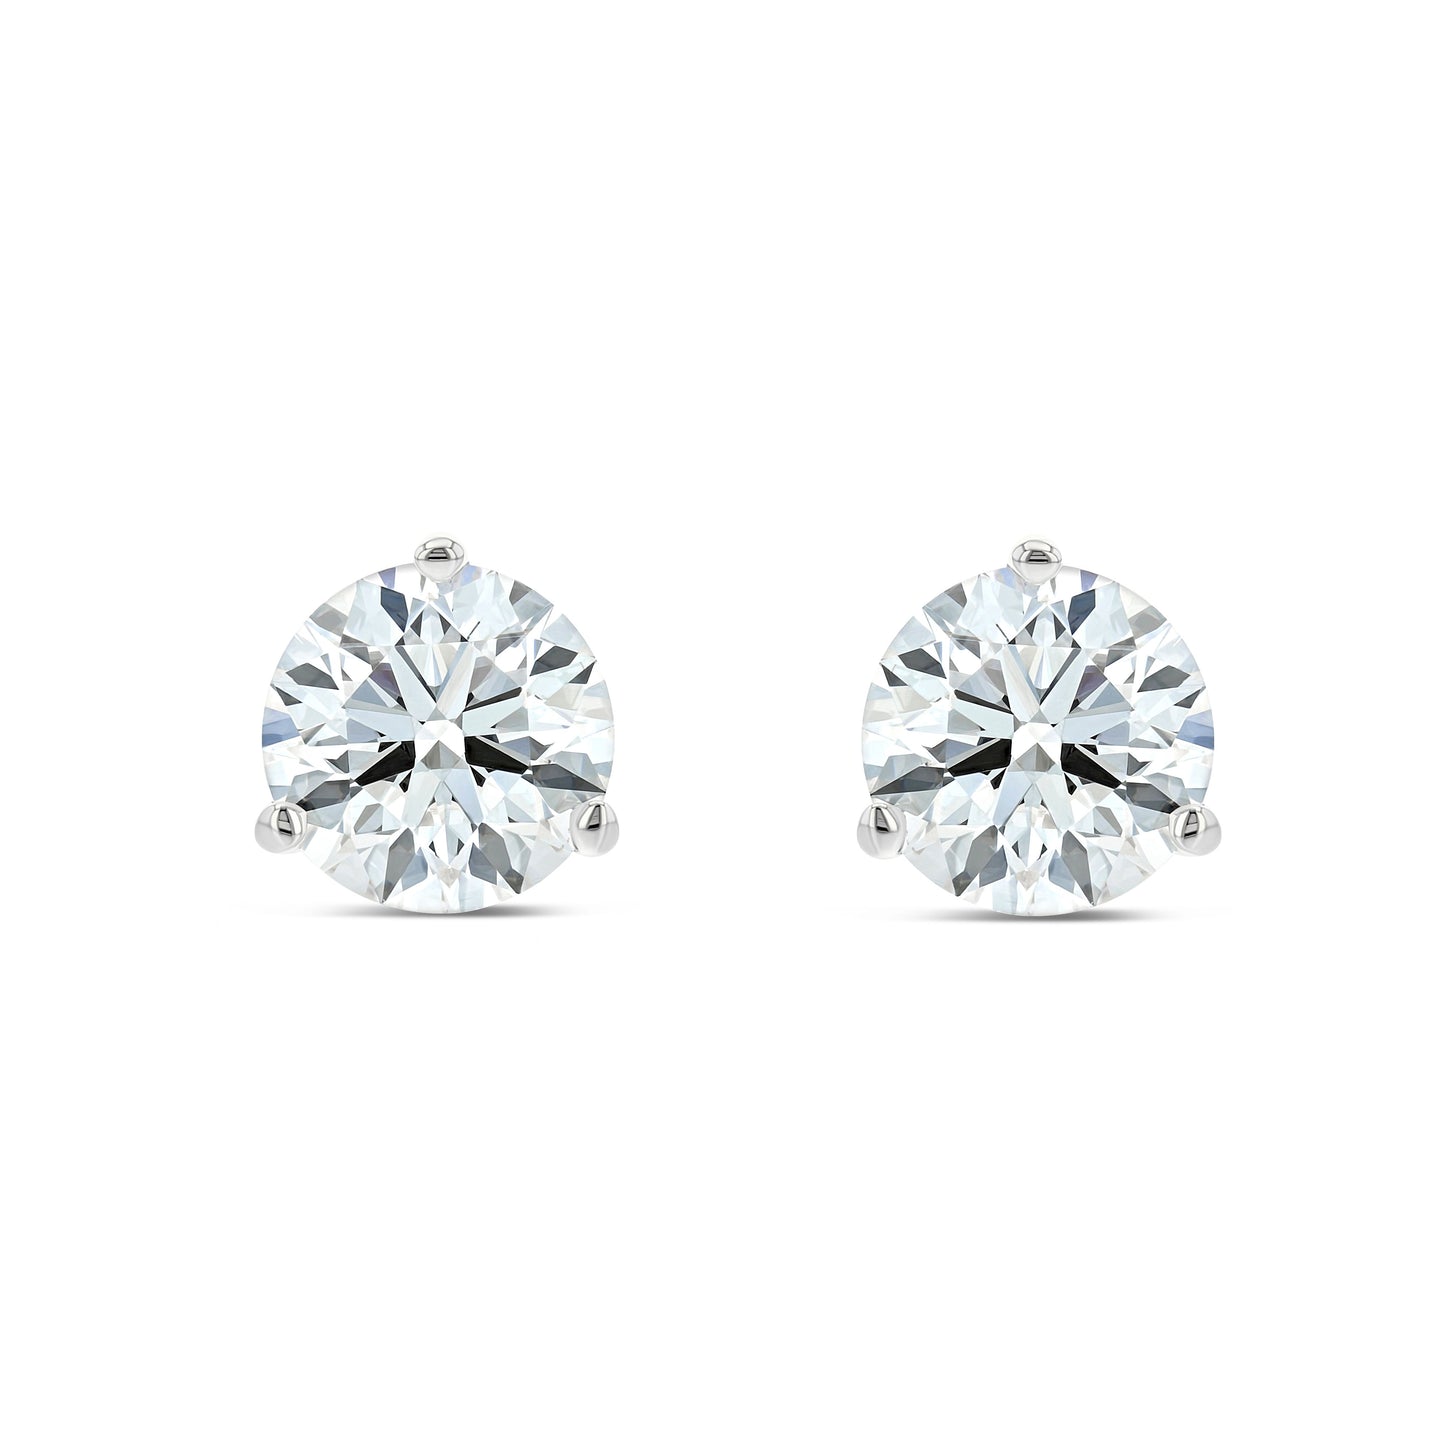 18k White Gold 3-prong Martini Round Diamond Stud Earrings 1/2ctw (4.0mm Ea), G-h Color, I1 Clarity